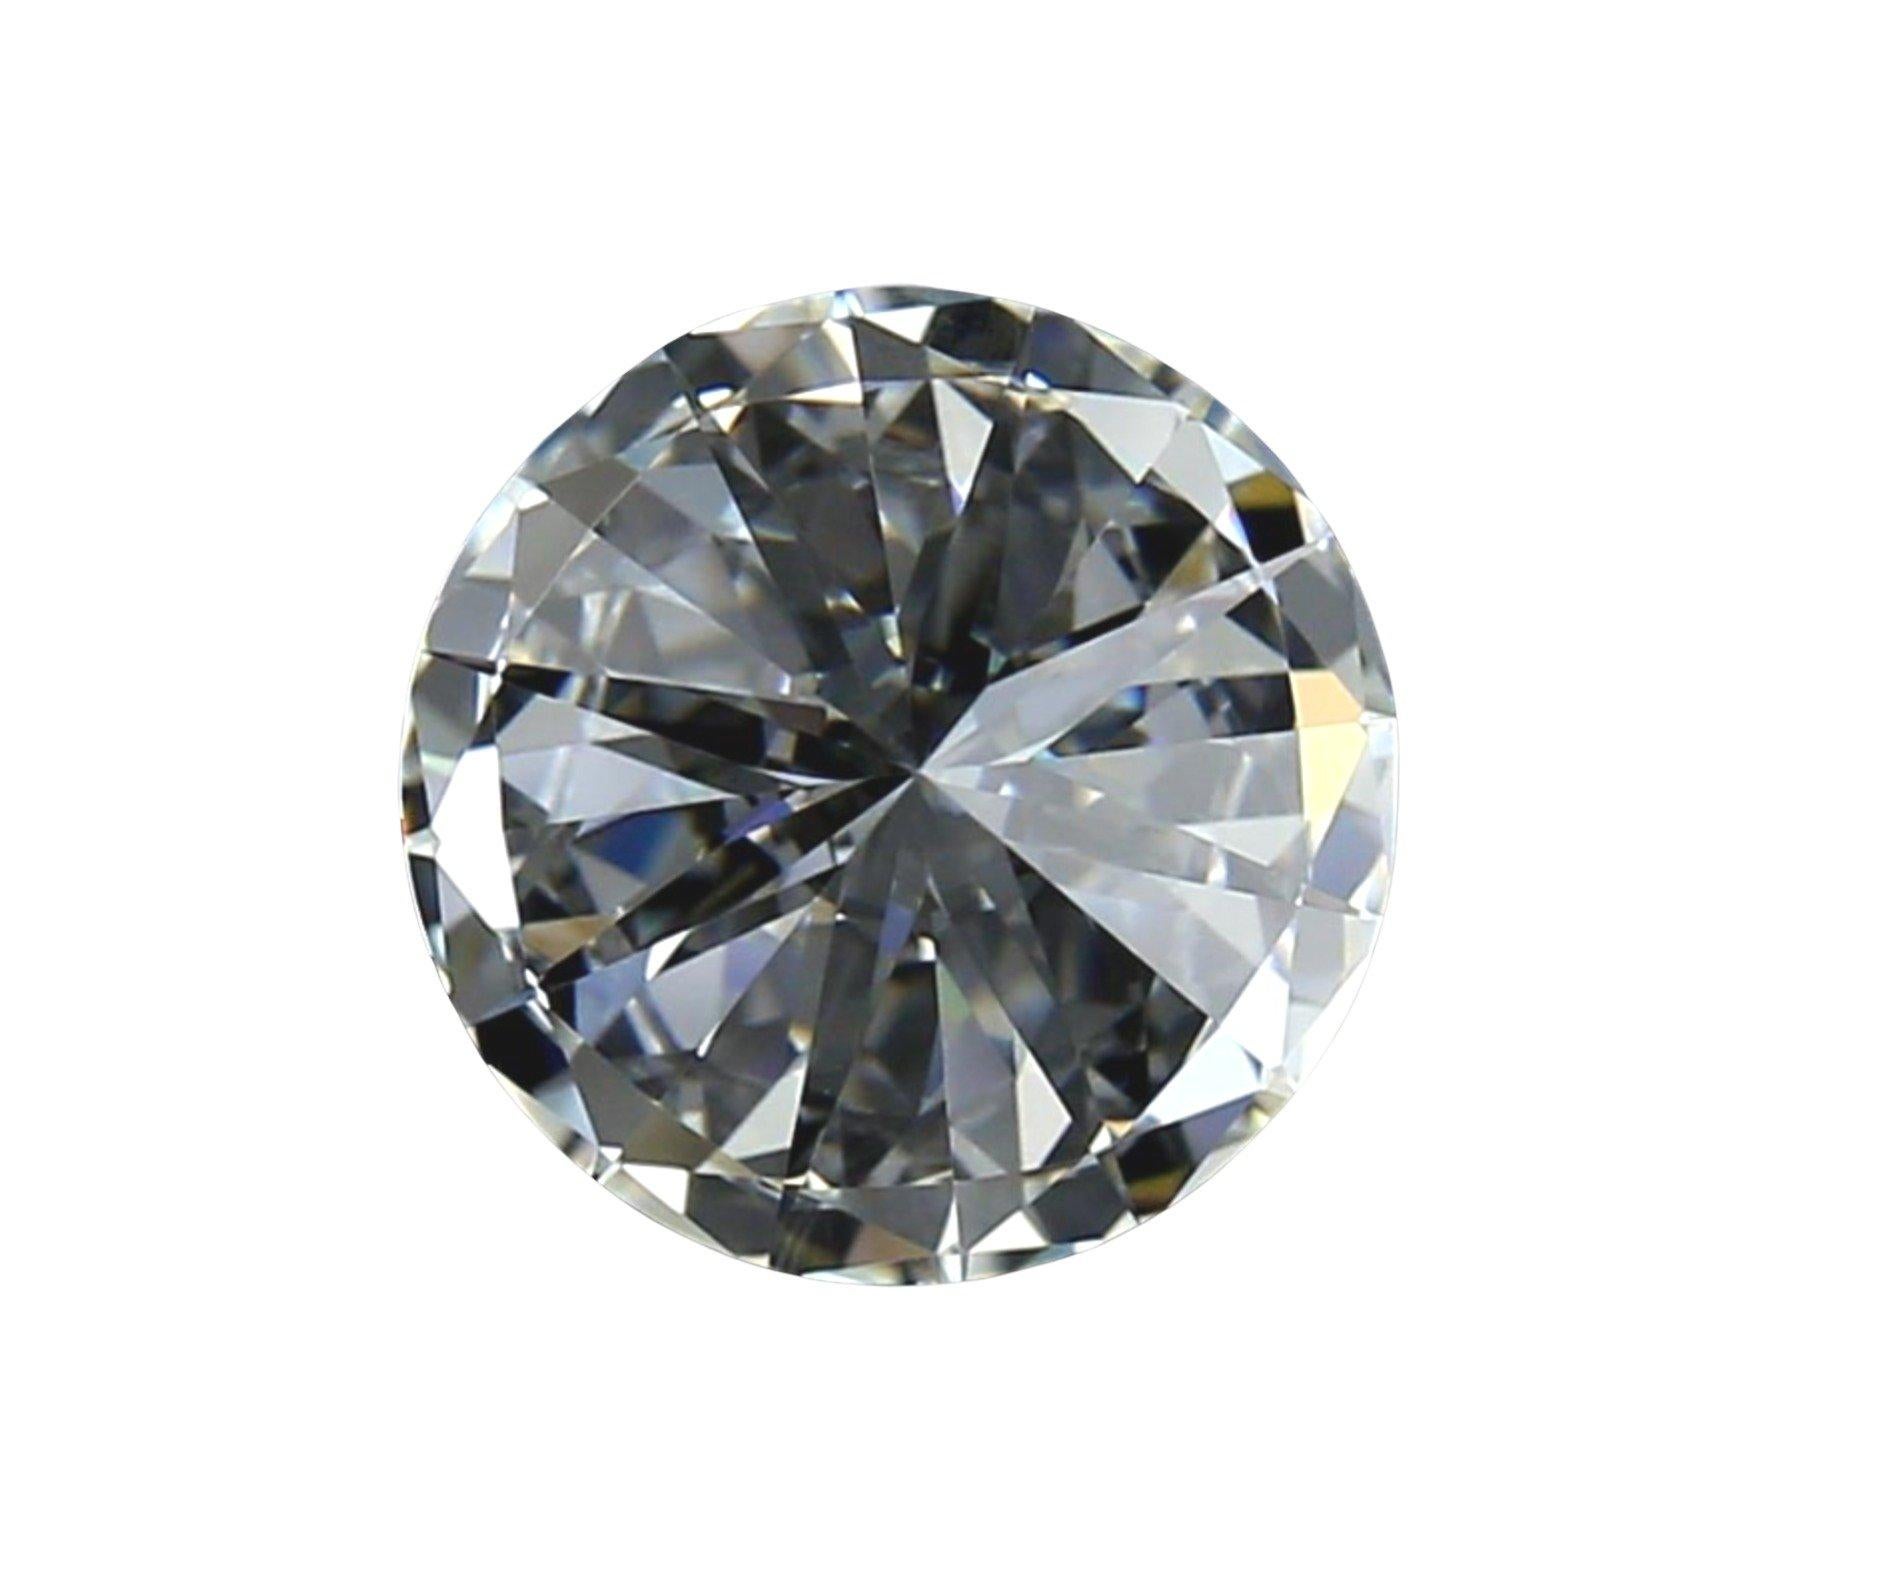 Dazzling 1 pc Natural Diamond 1.03 ct Round I VVS1 GIA Certificate For Sale 2